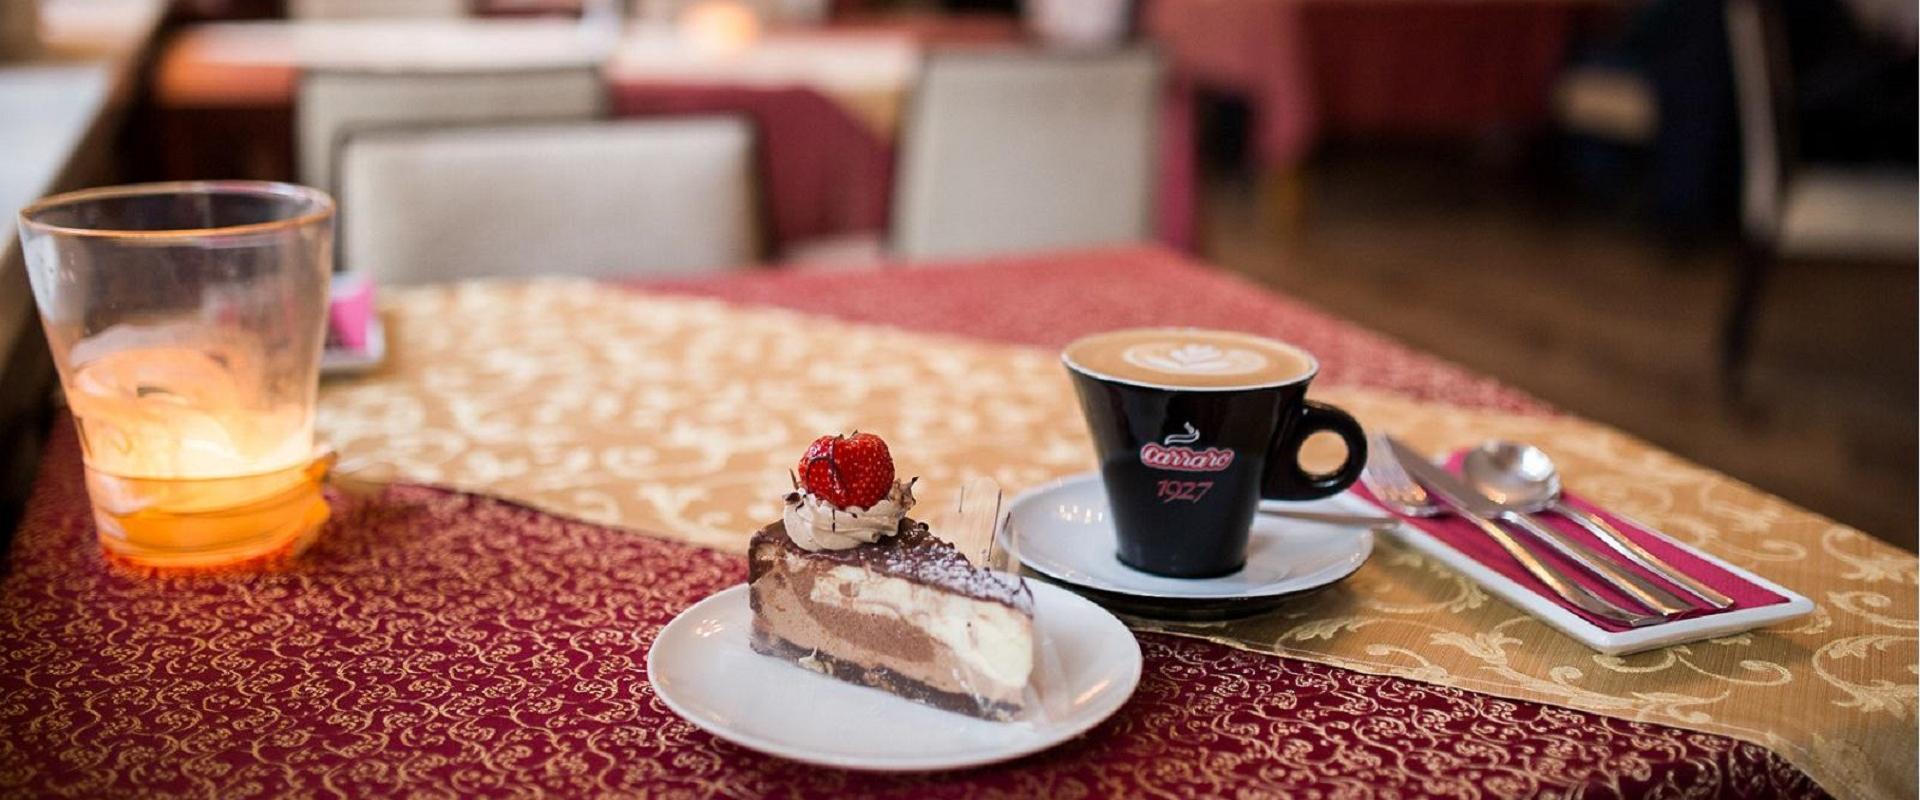 Werner Café, with a cake and a cup of coffee